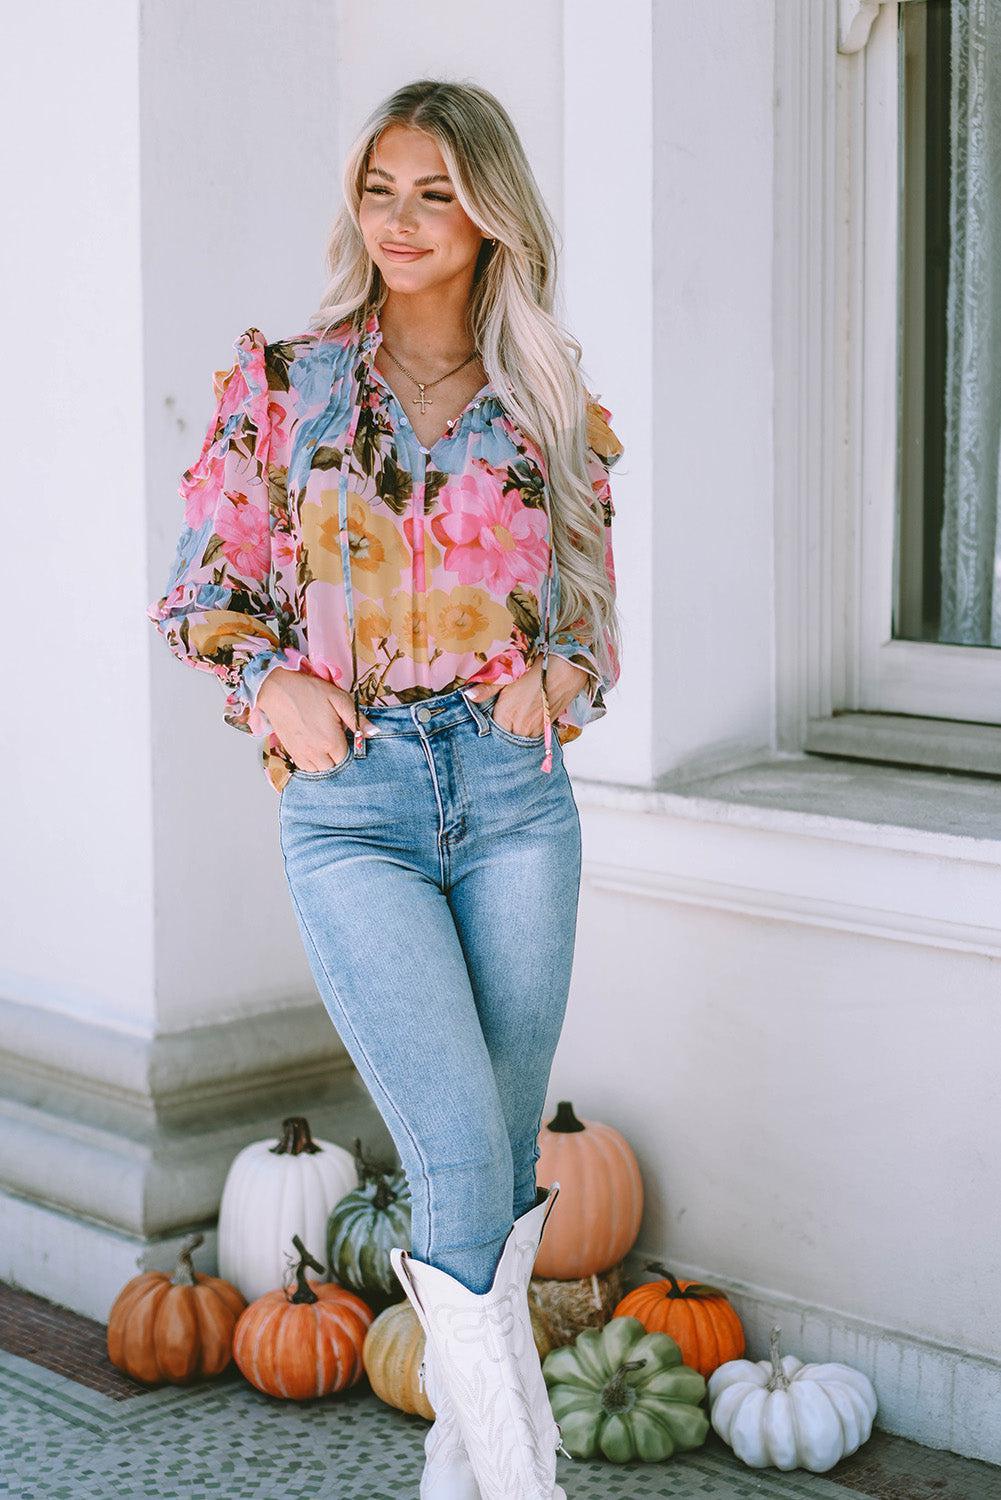 a woman wearing a floral shirt and jeans